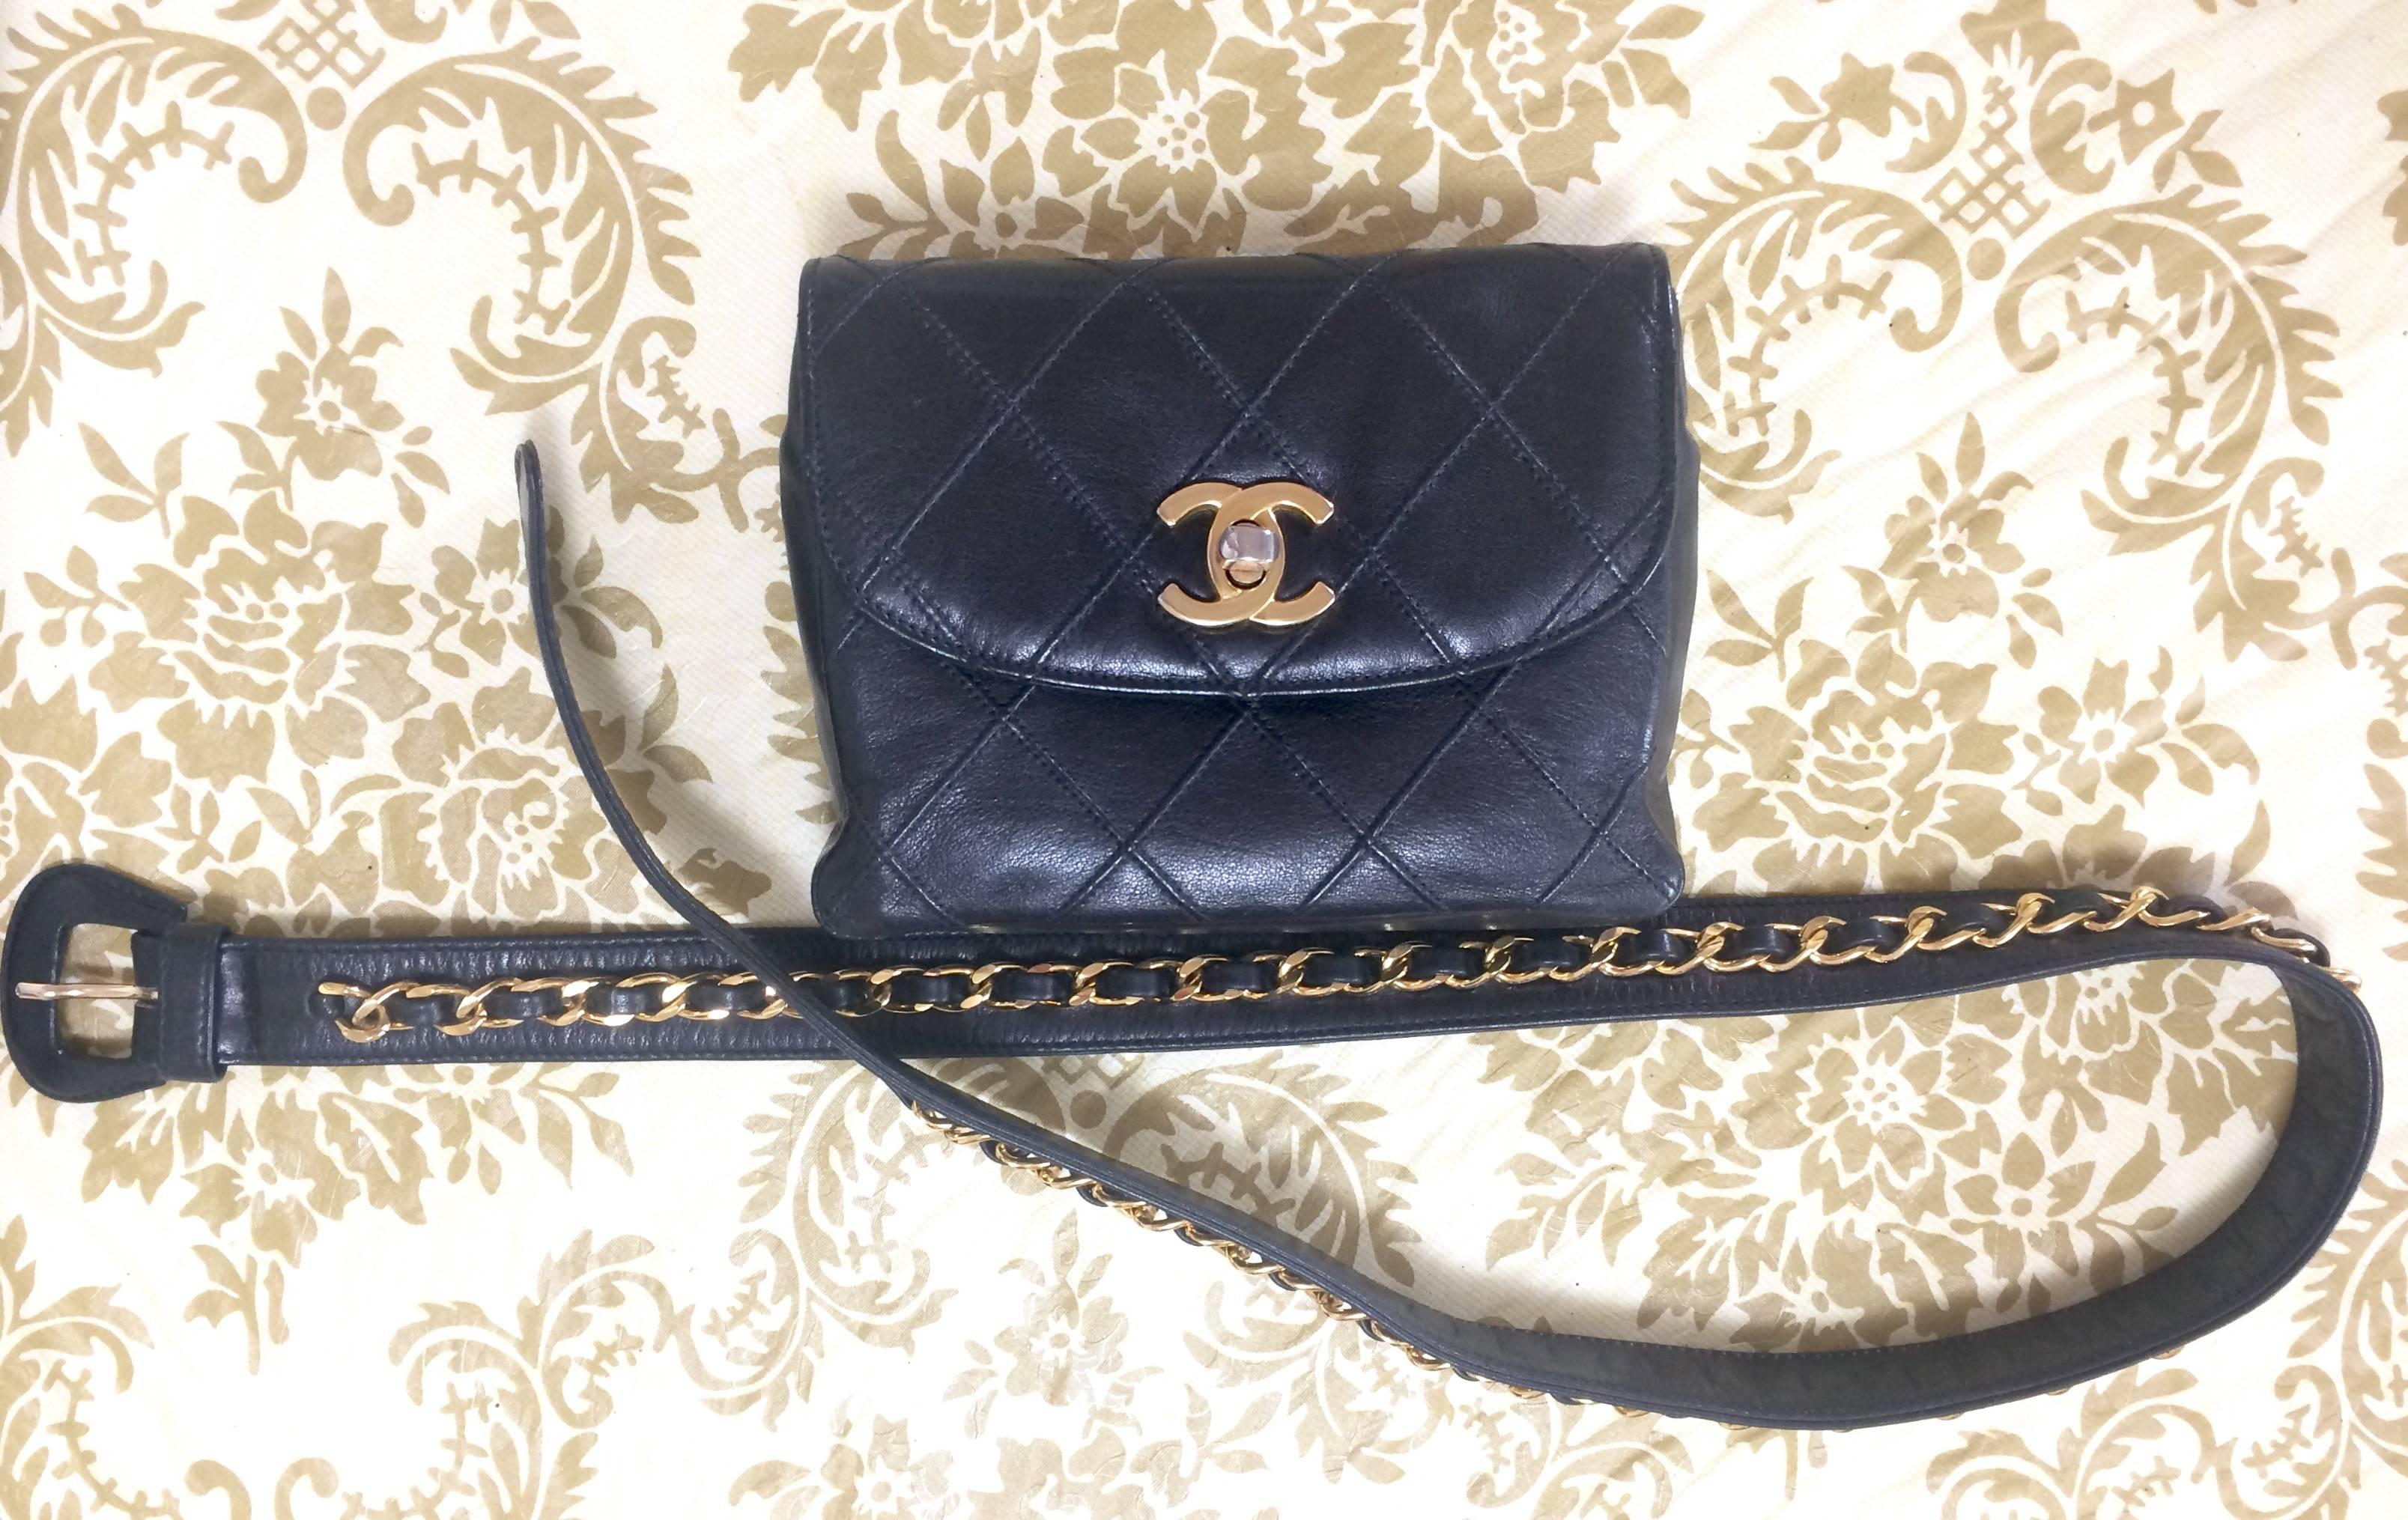 Vintage CHANEL black waist purse, fanny bag with golden chain belt and CC mark. 5